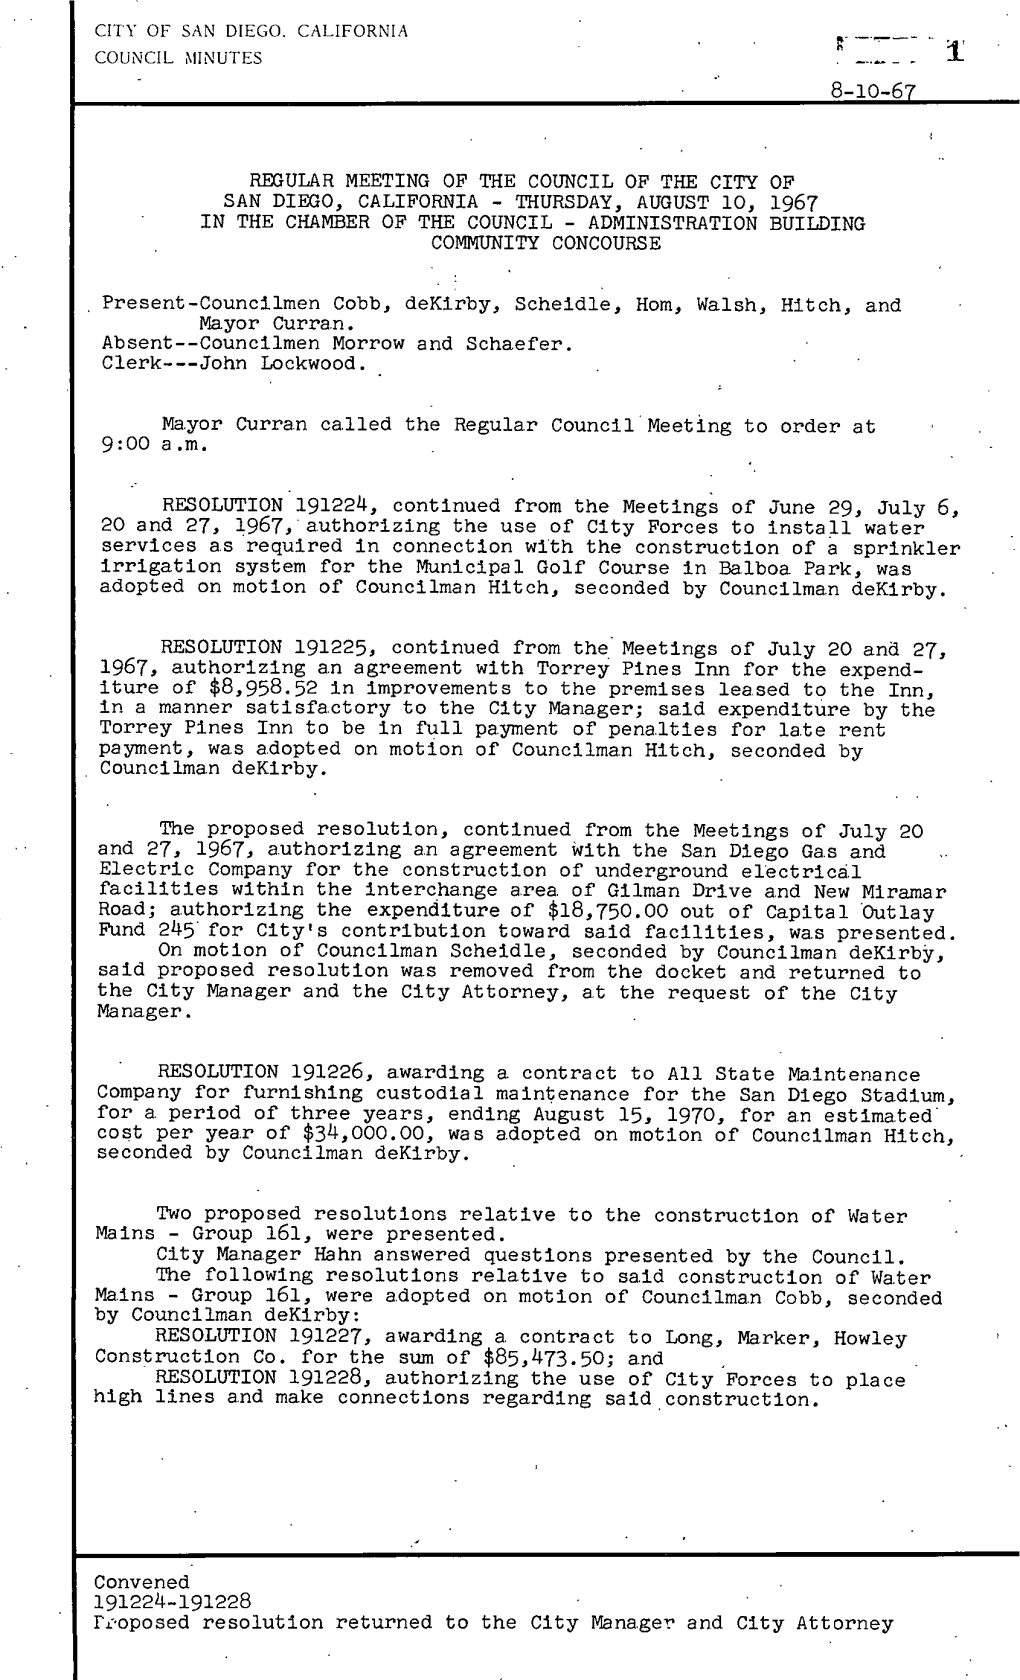 Minutes of Common Council Book 121 August 10, 1967